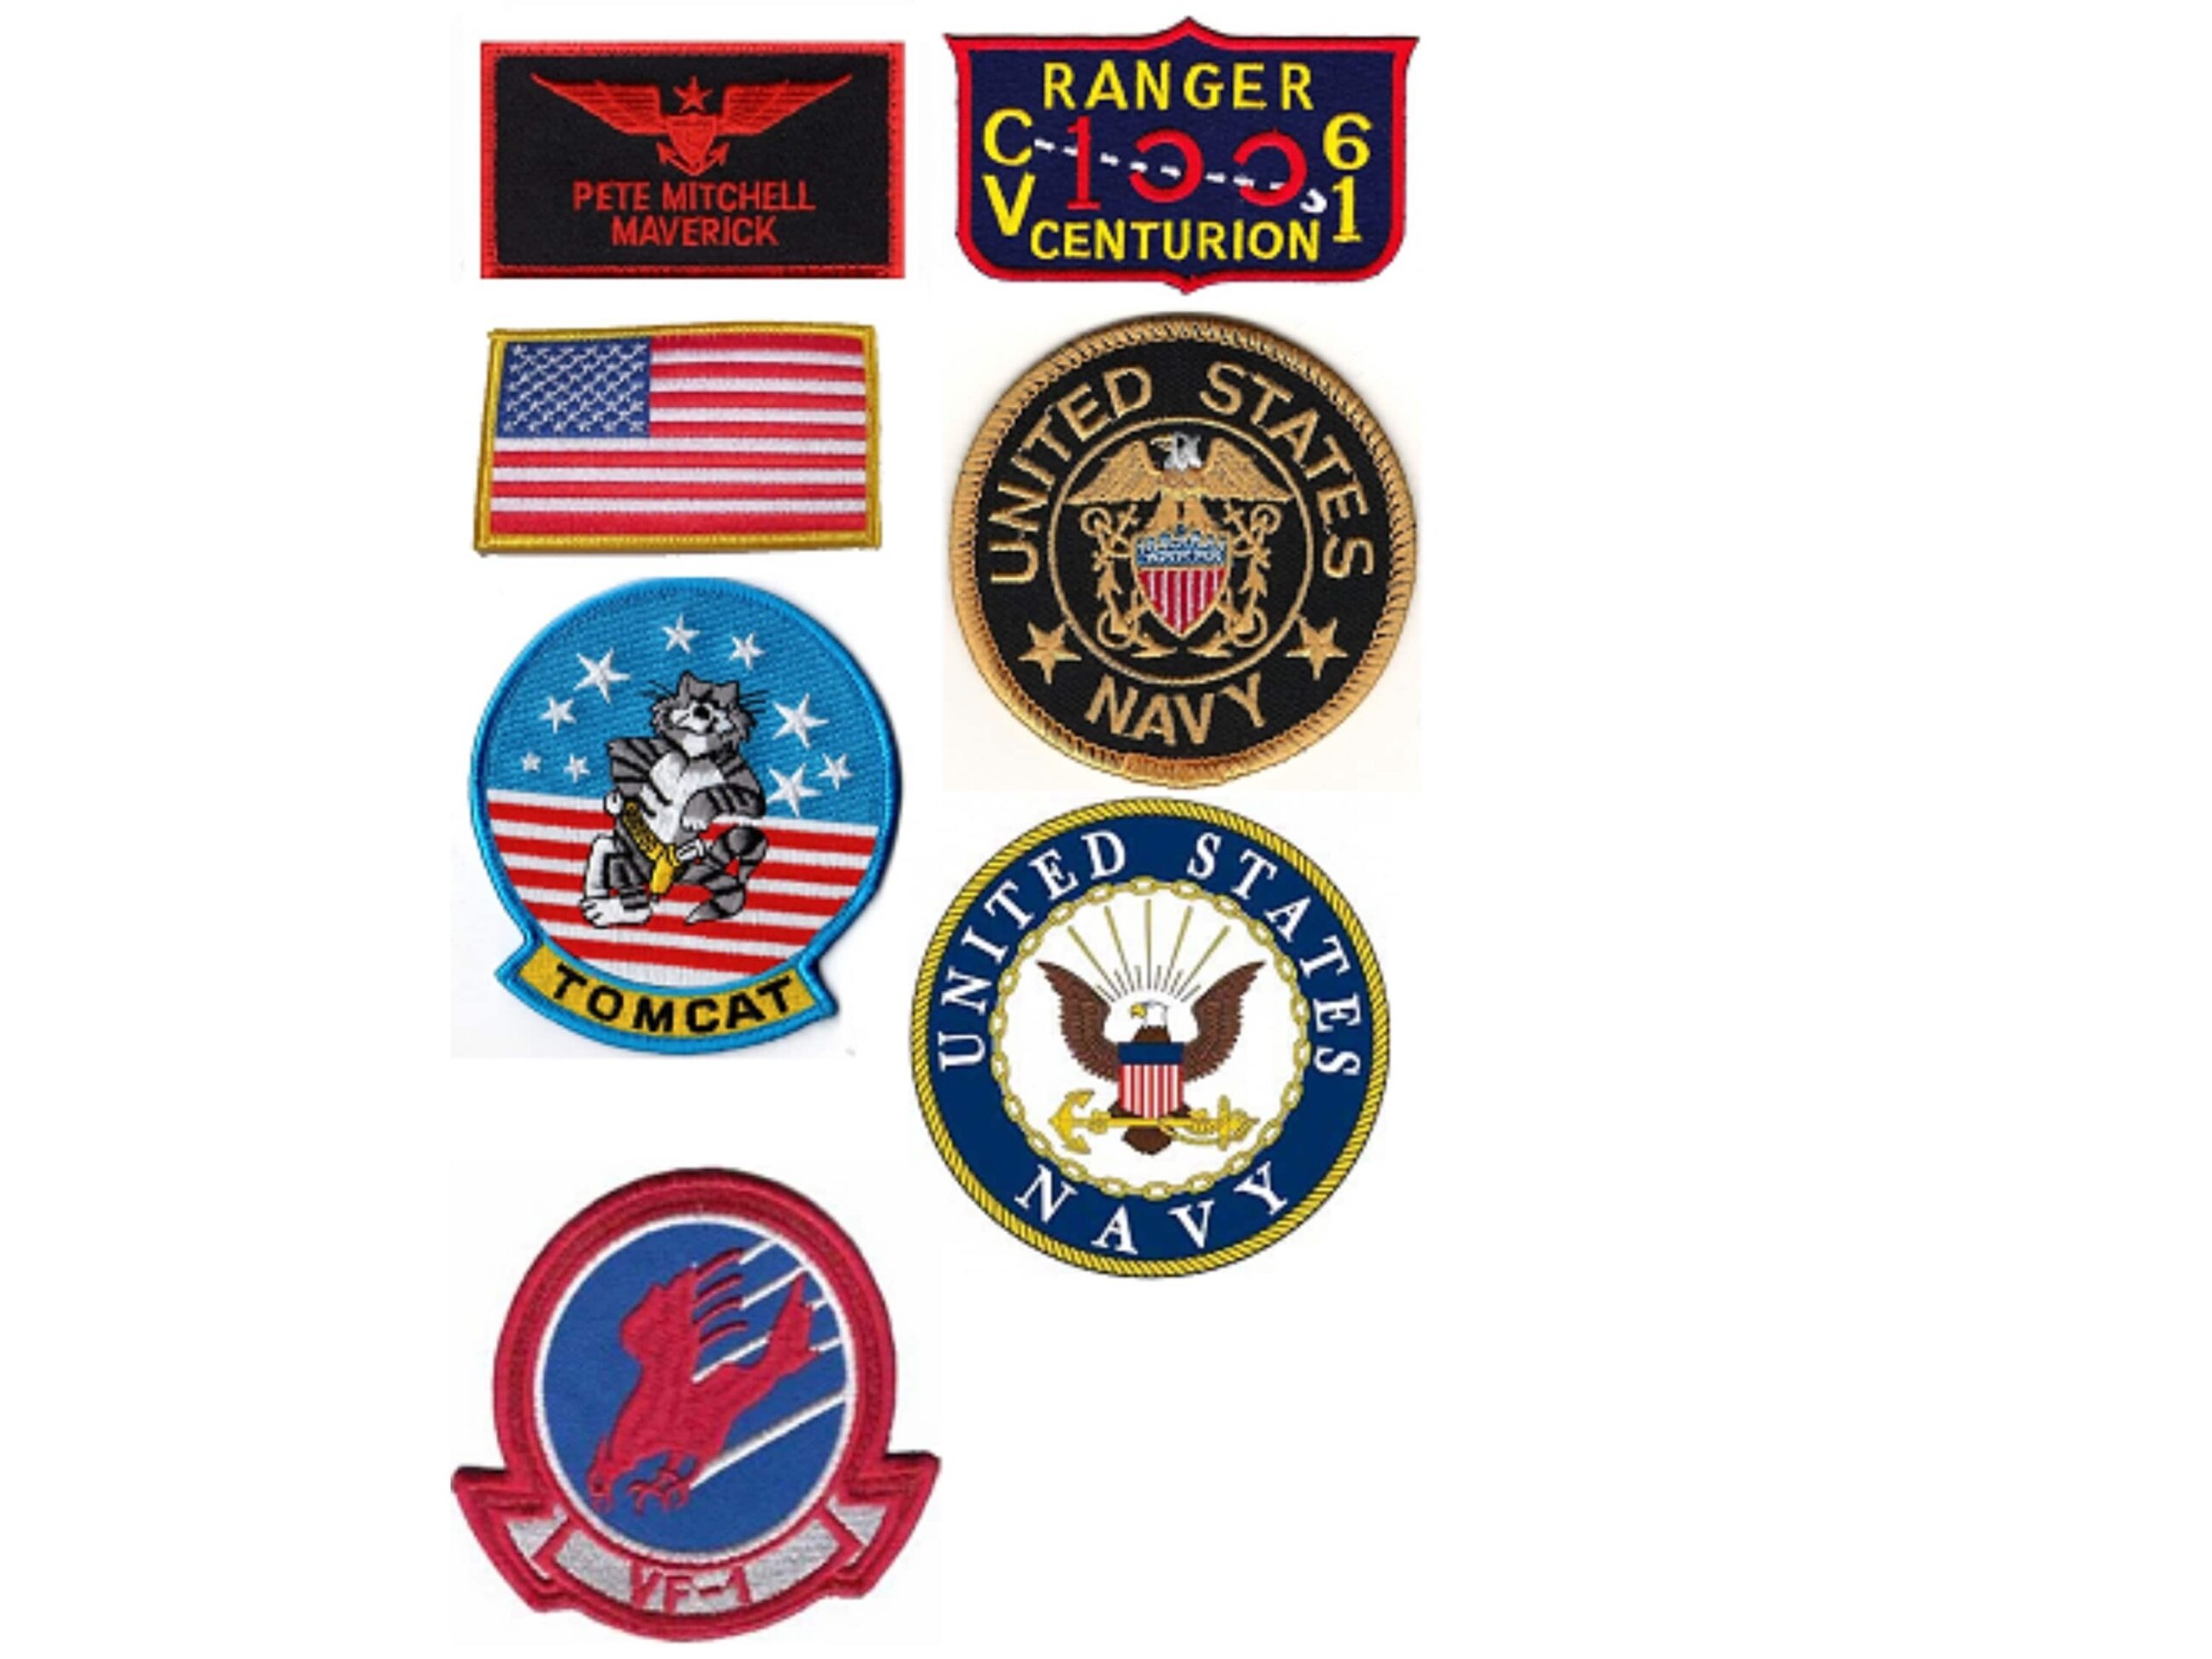 Top Gun Patches Goose Patches Maverick Patches Top Gun Maverick Patches Top Gun Badges Top Gun Pete Mitchell Patches Etsy